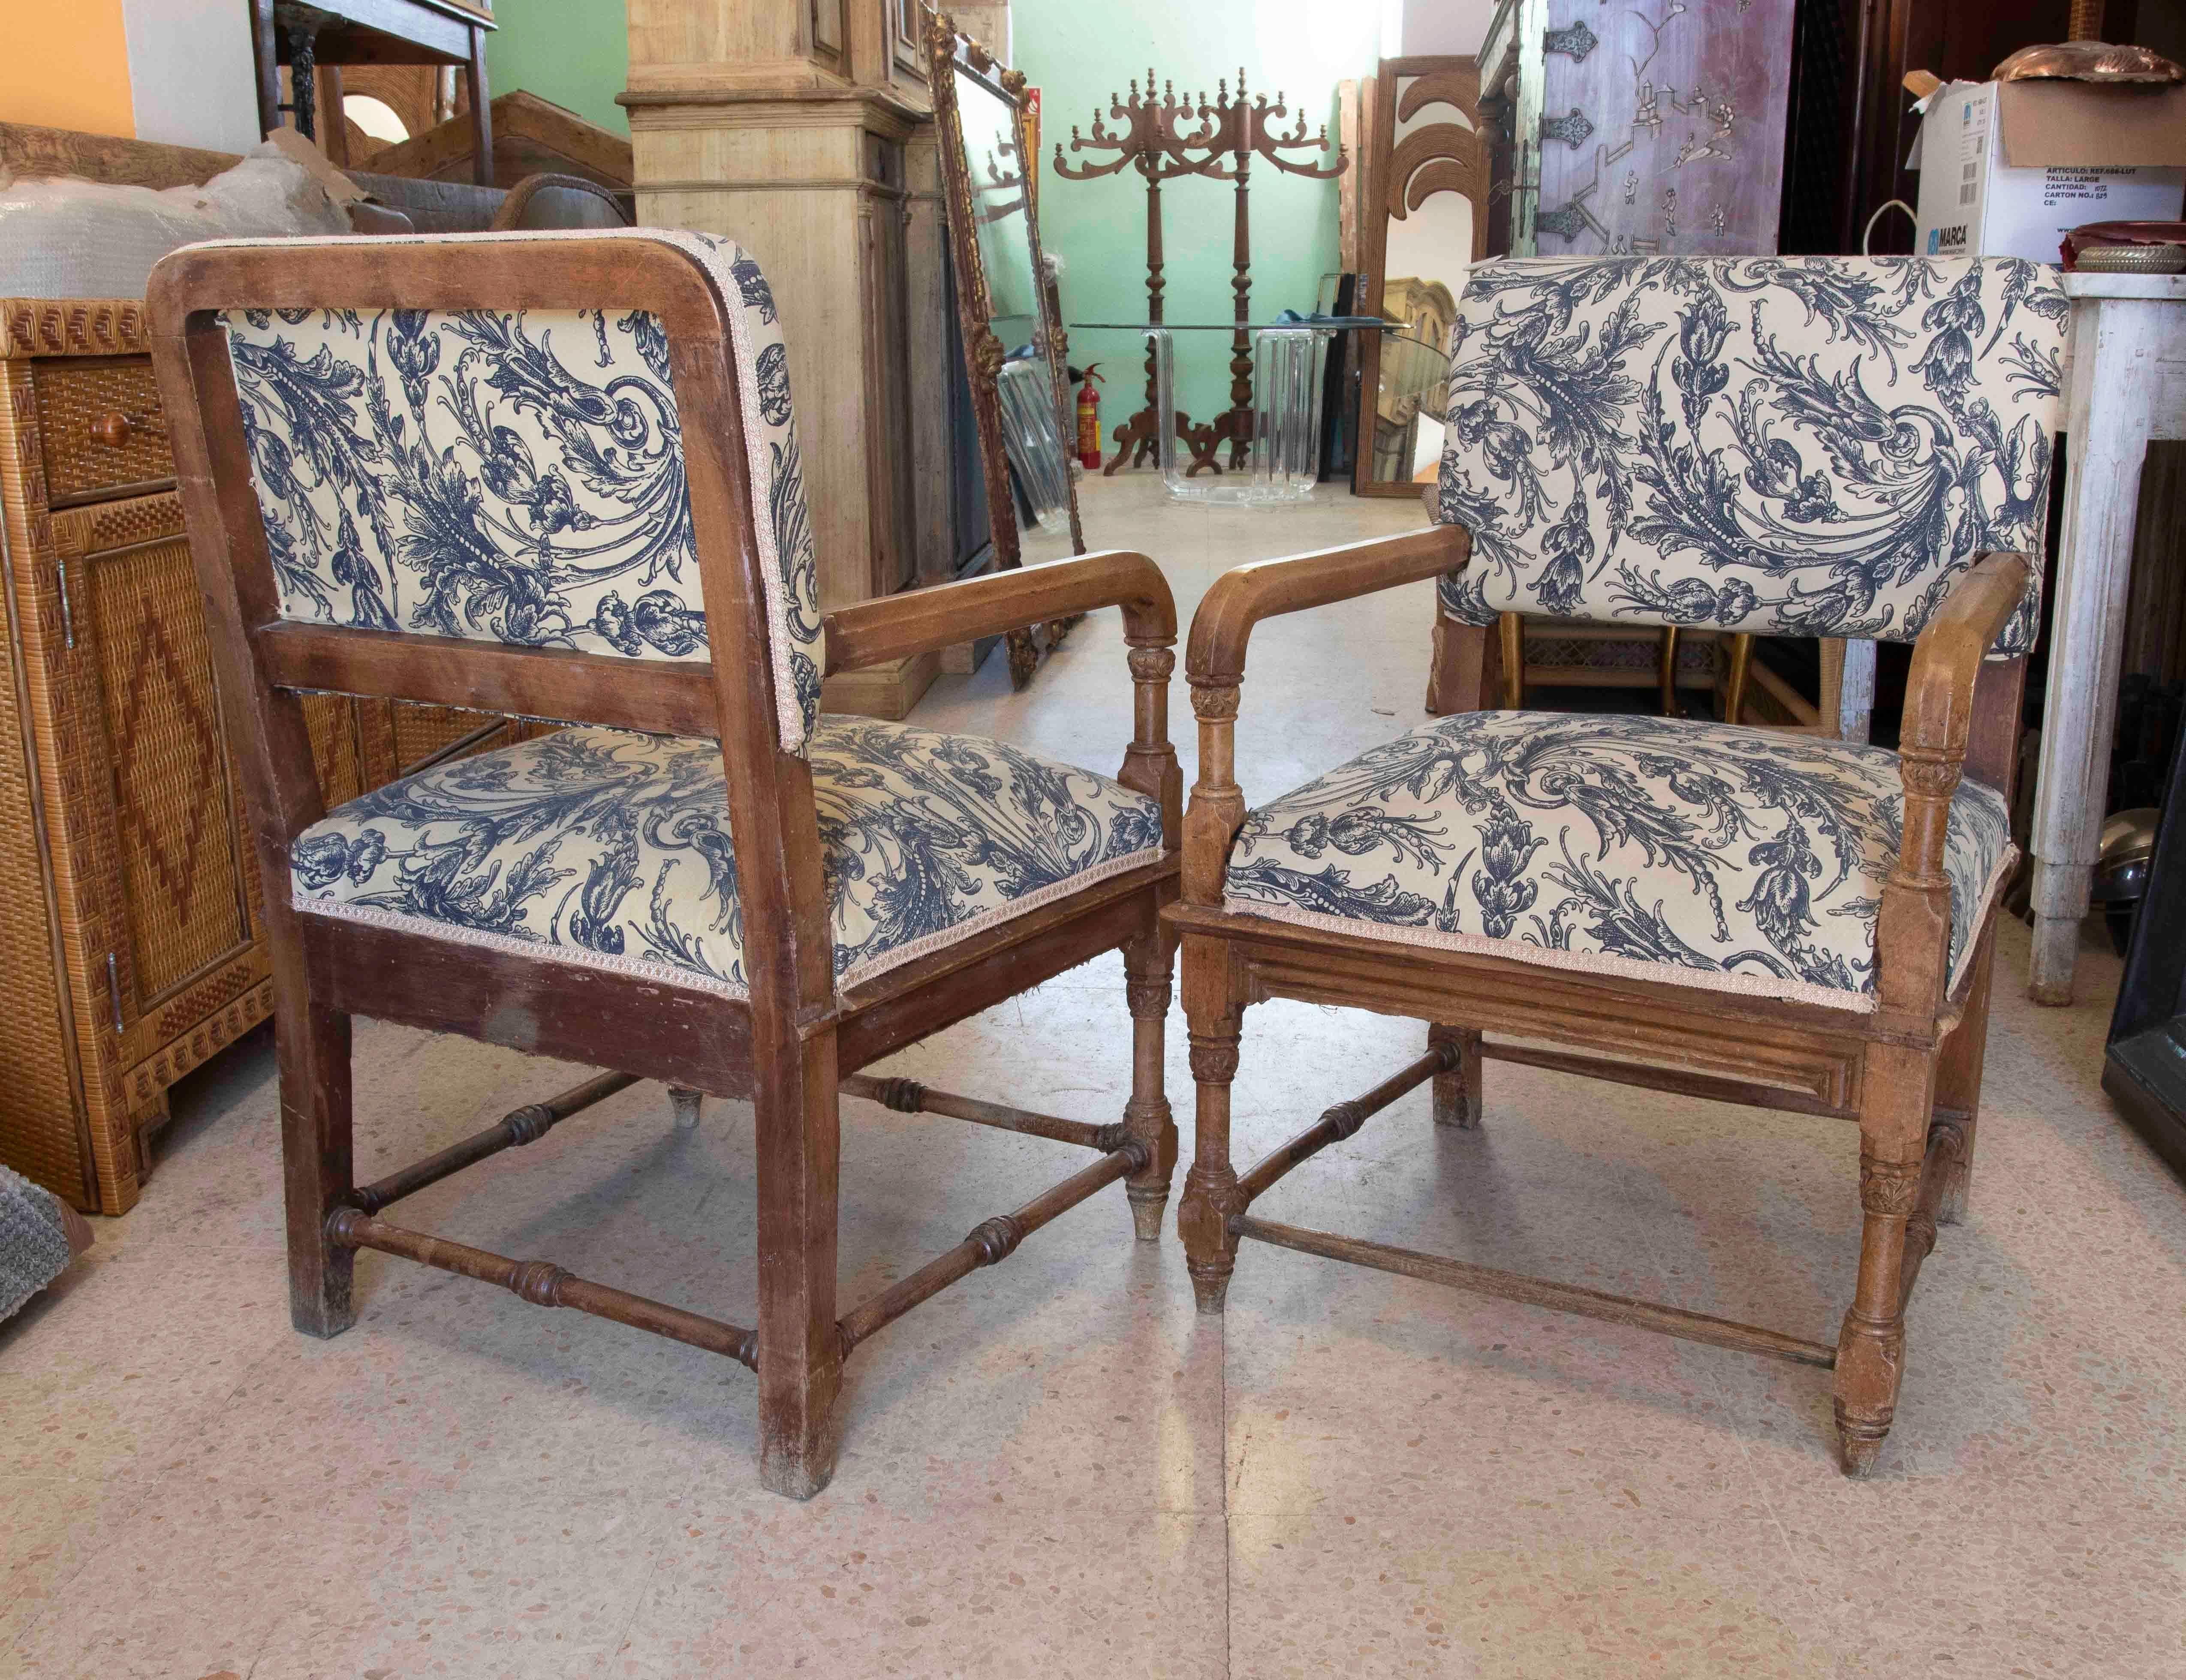 19th Century English Pair of Wooden Armchairs with Hand-Carved Decorations For Sale